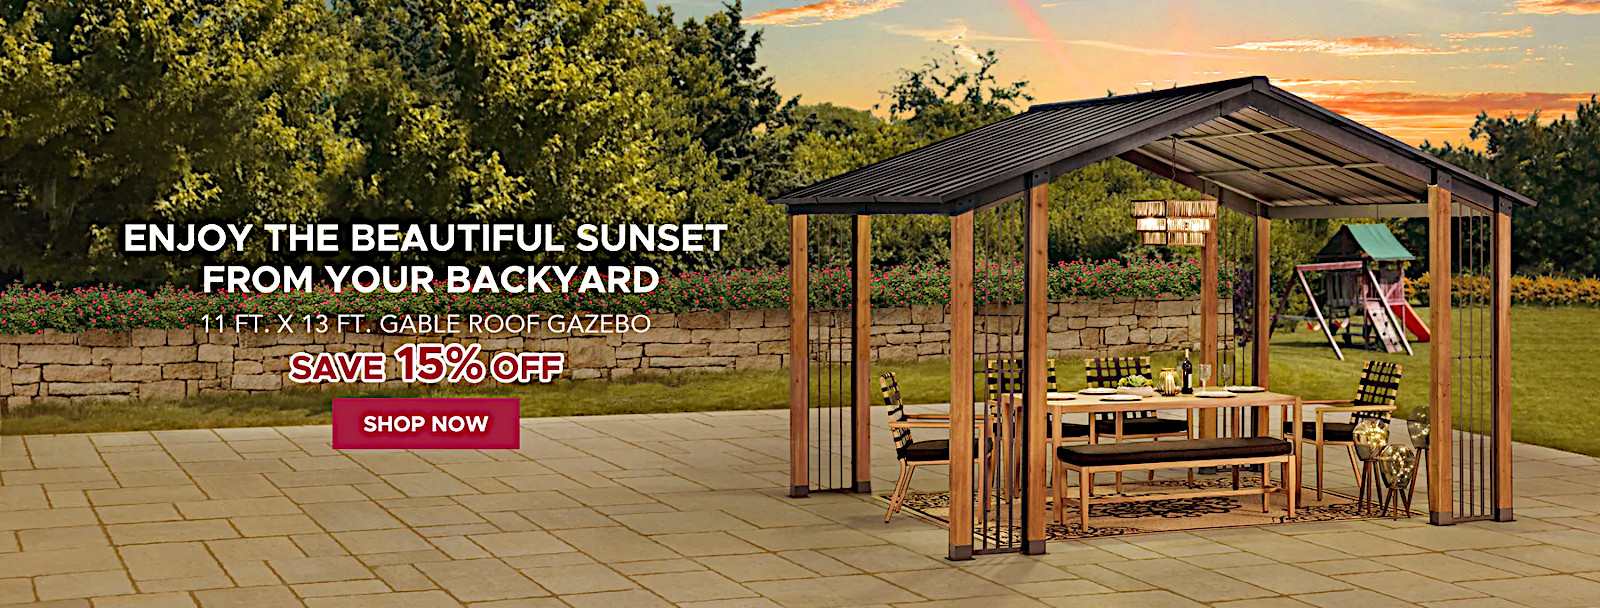 gable roof gazebo special discount